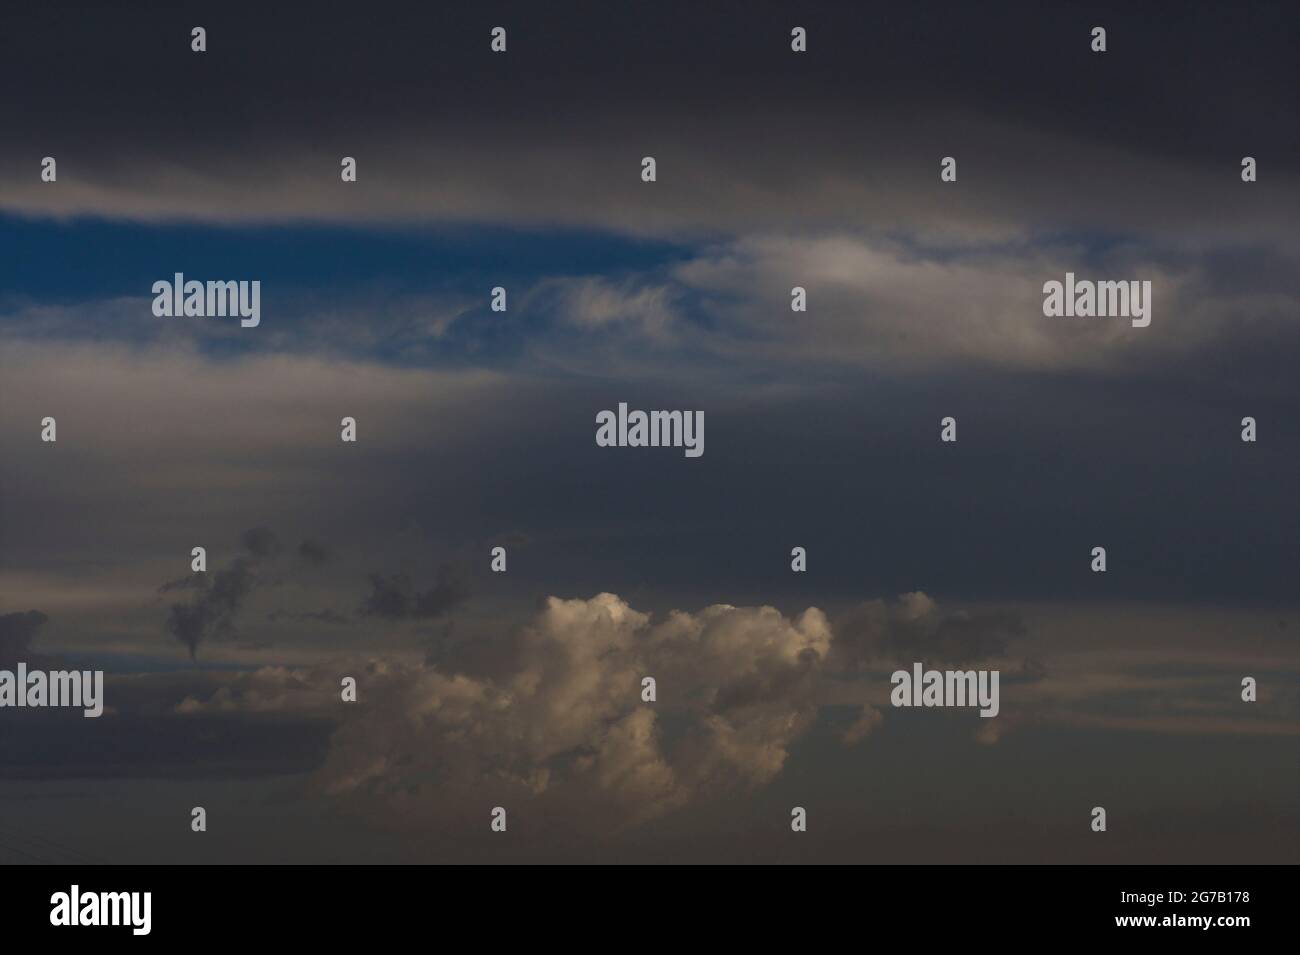 Skyscape. Moody cloud formation Stock Photo